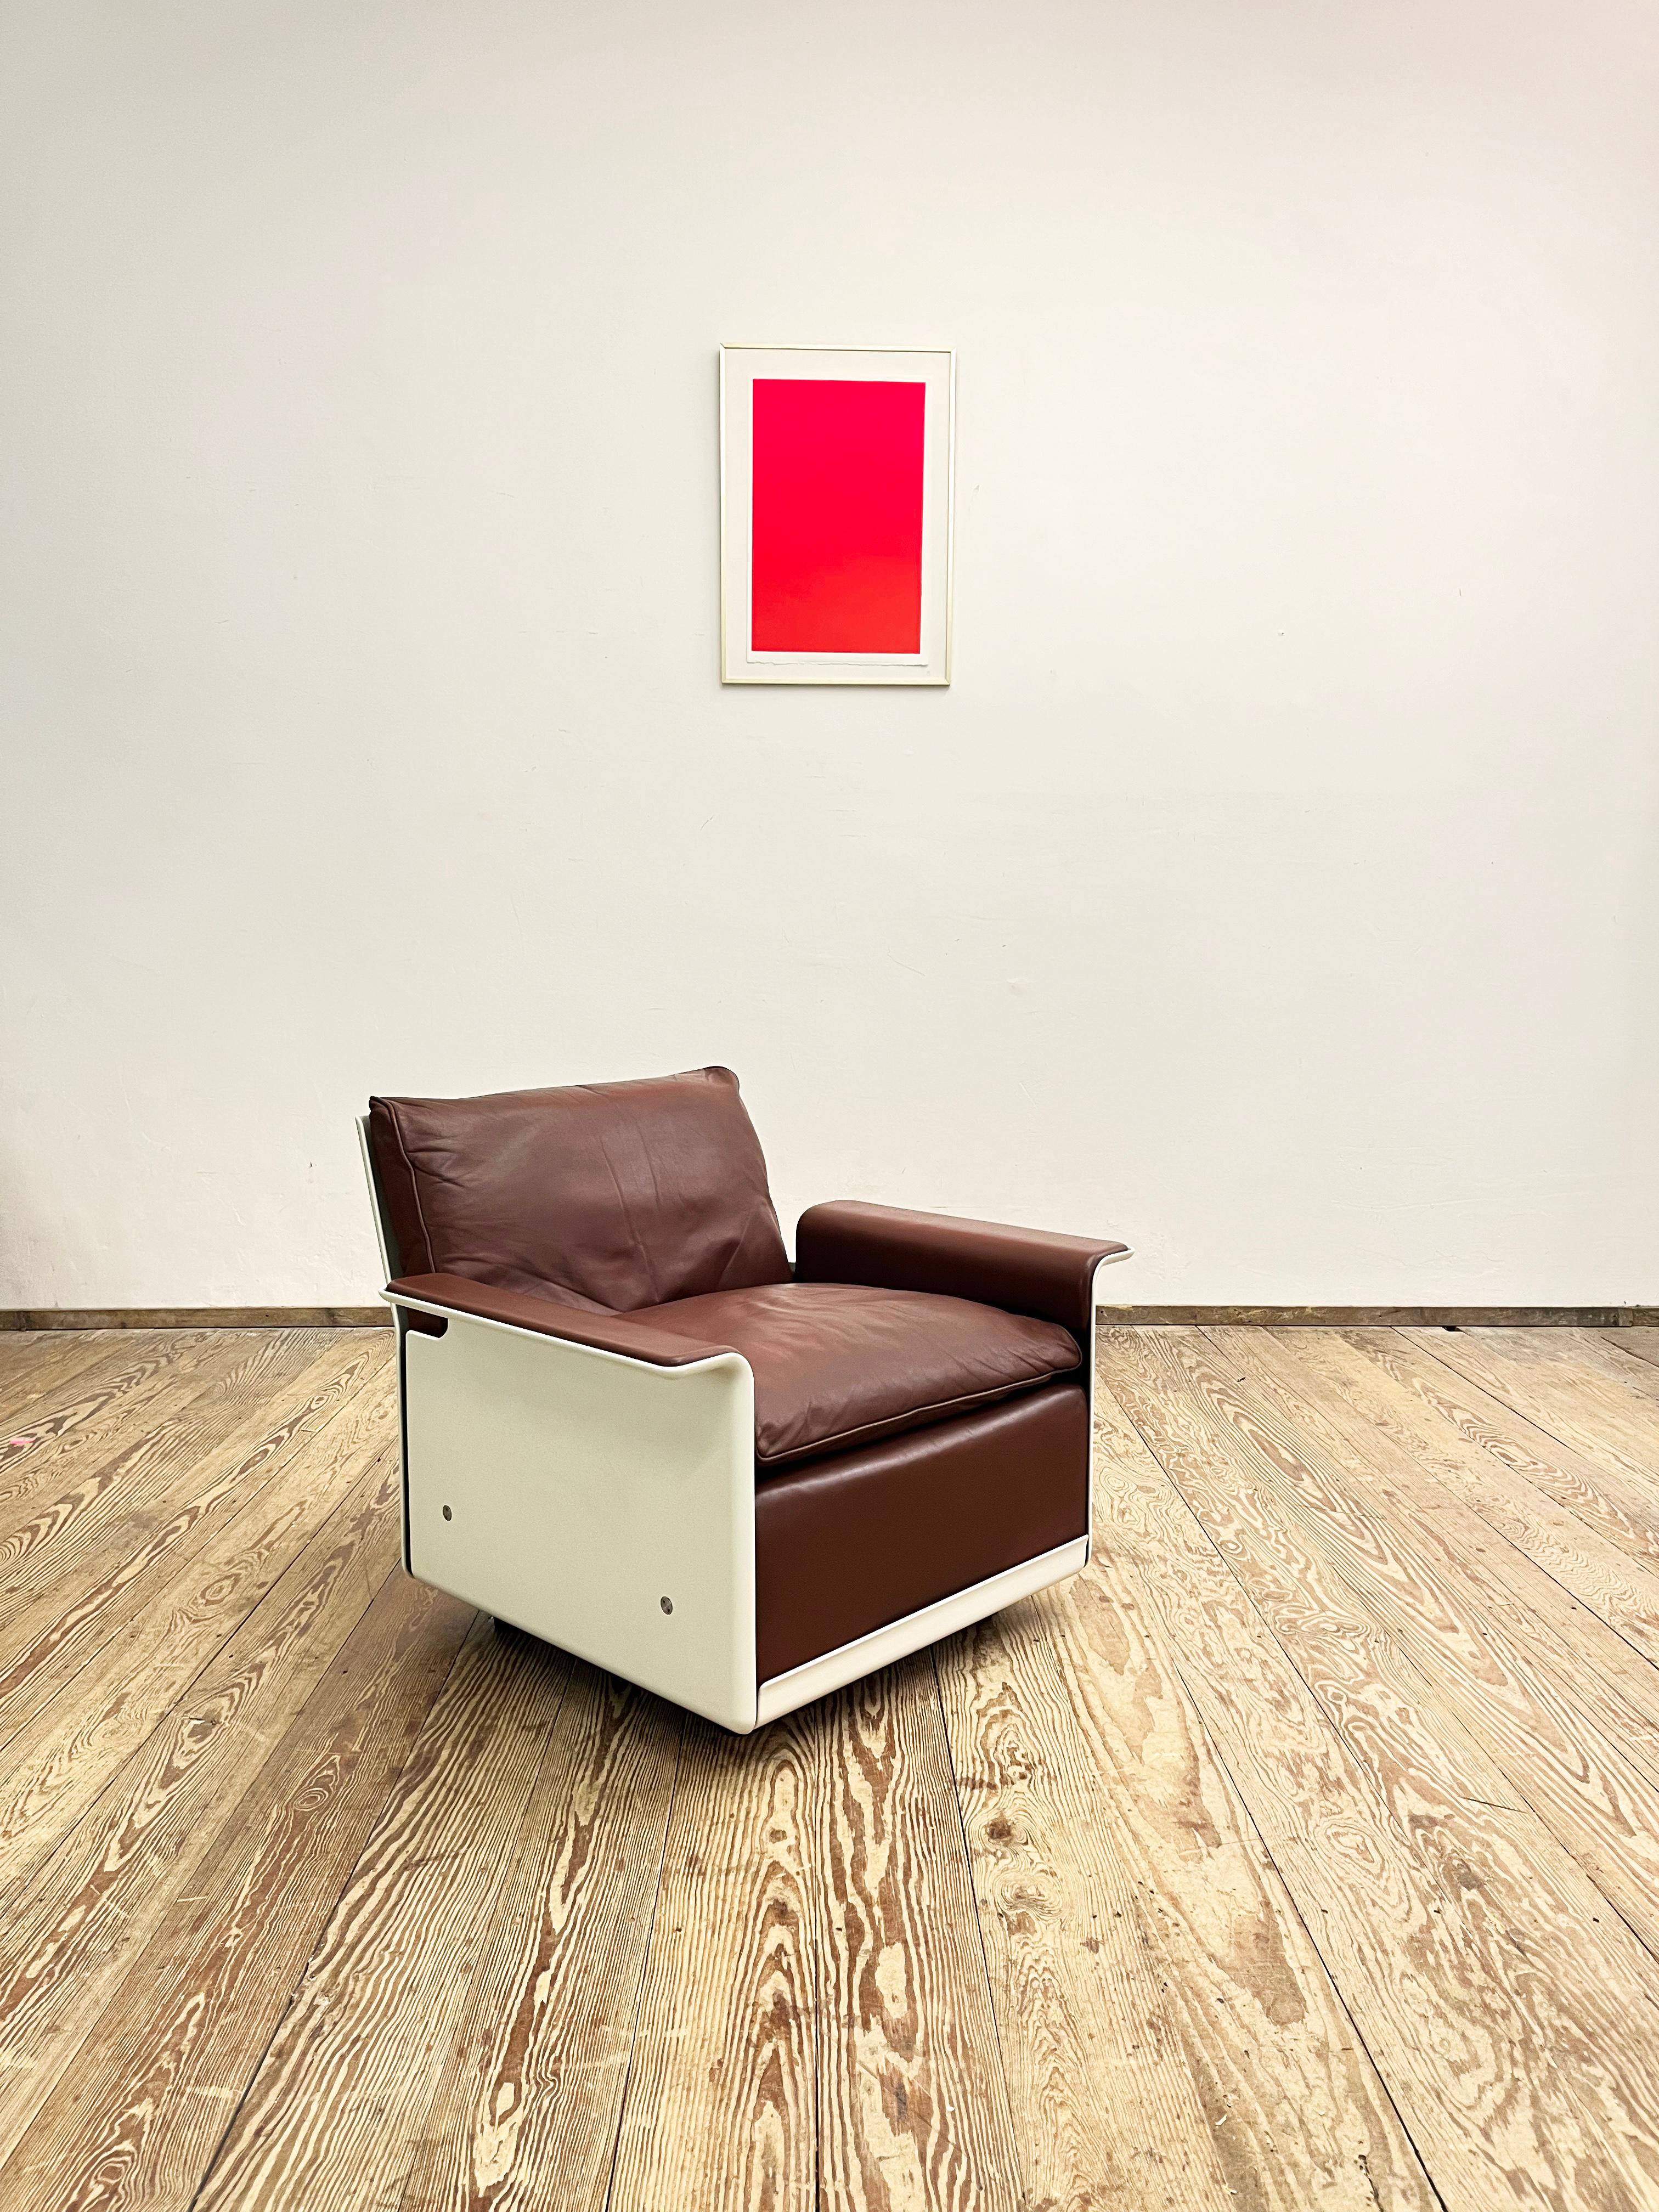 Dimensions ca. 88 x 78 x 65 x 43 cm (WxDxHxSH)

This shapely and comfortable lounge easy chair was designed by German Designer Dieter Rams for Vitsoe in the 1960s in Germany. The 620 series is a system of furniture parts that can be used to create